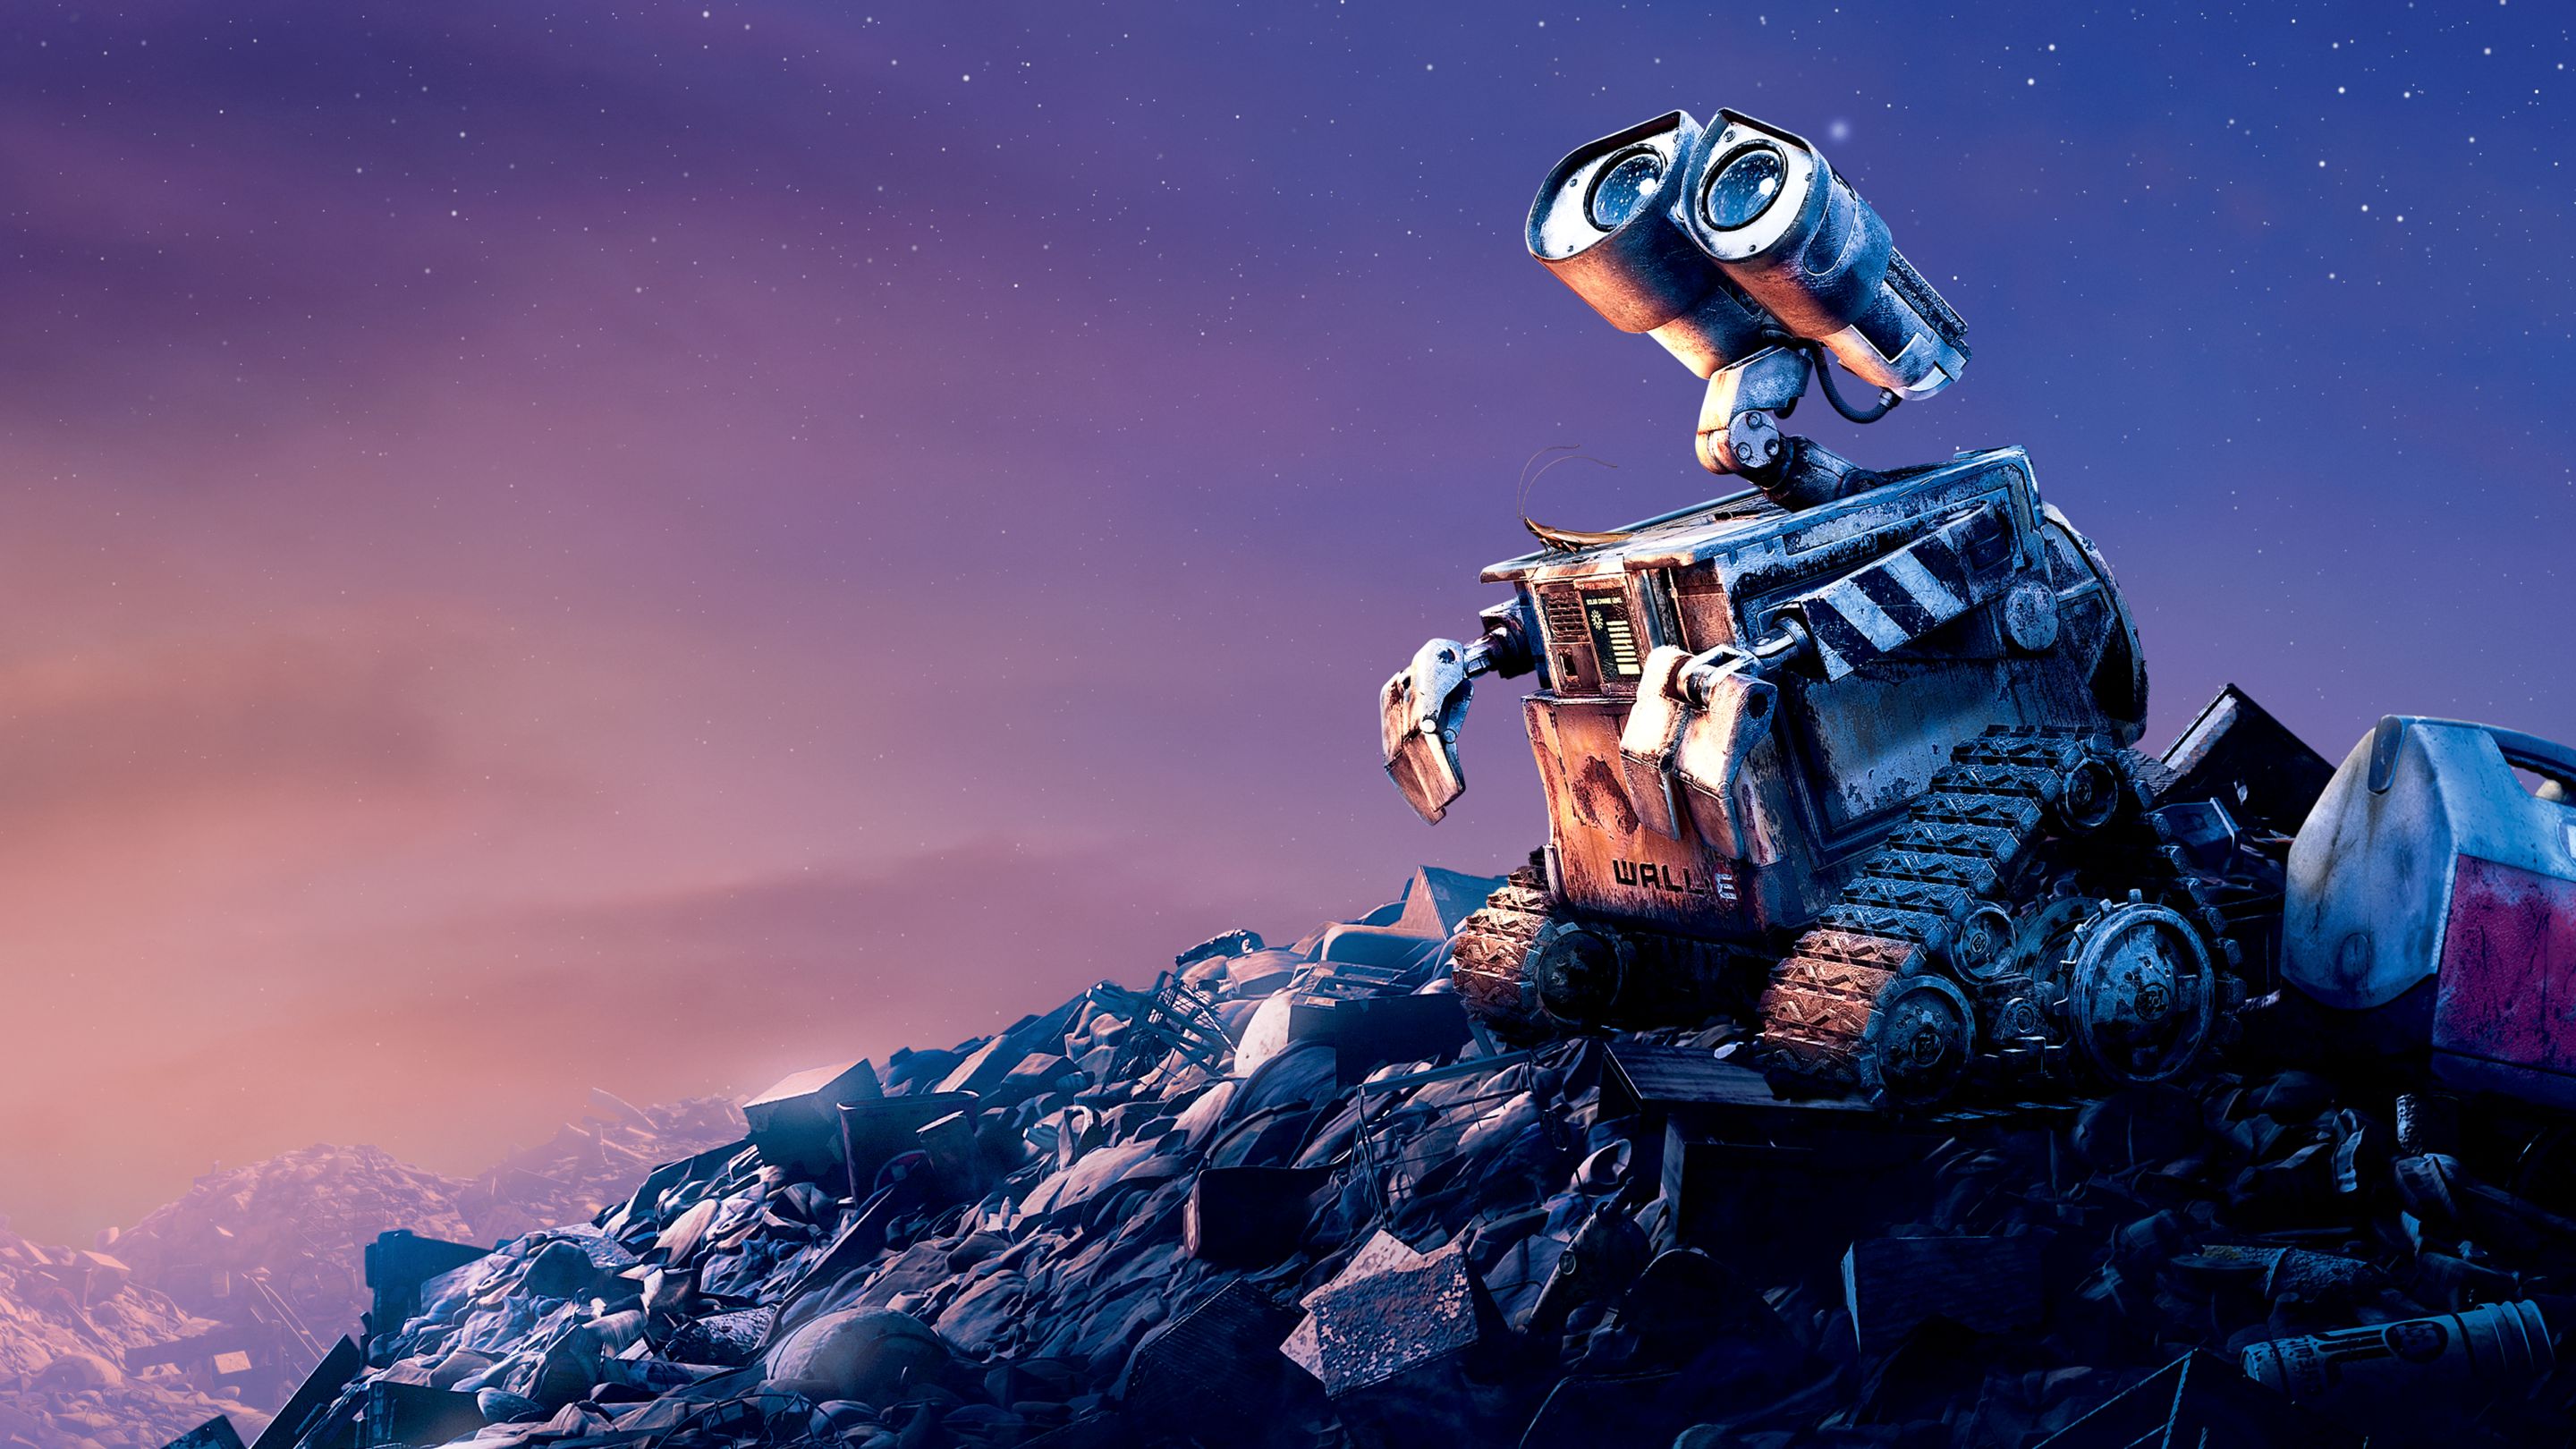 Top 10 reasons why we love Wall-E